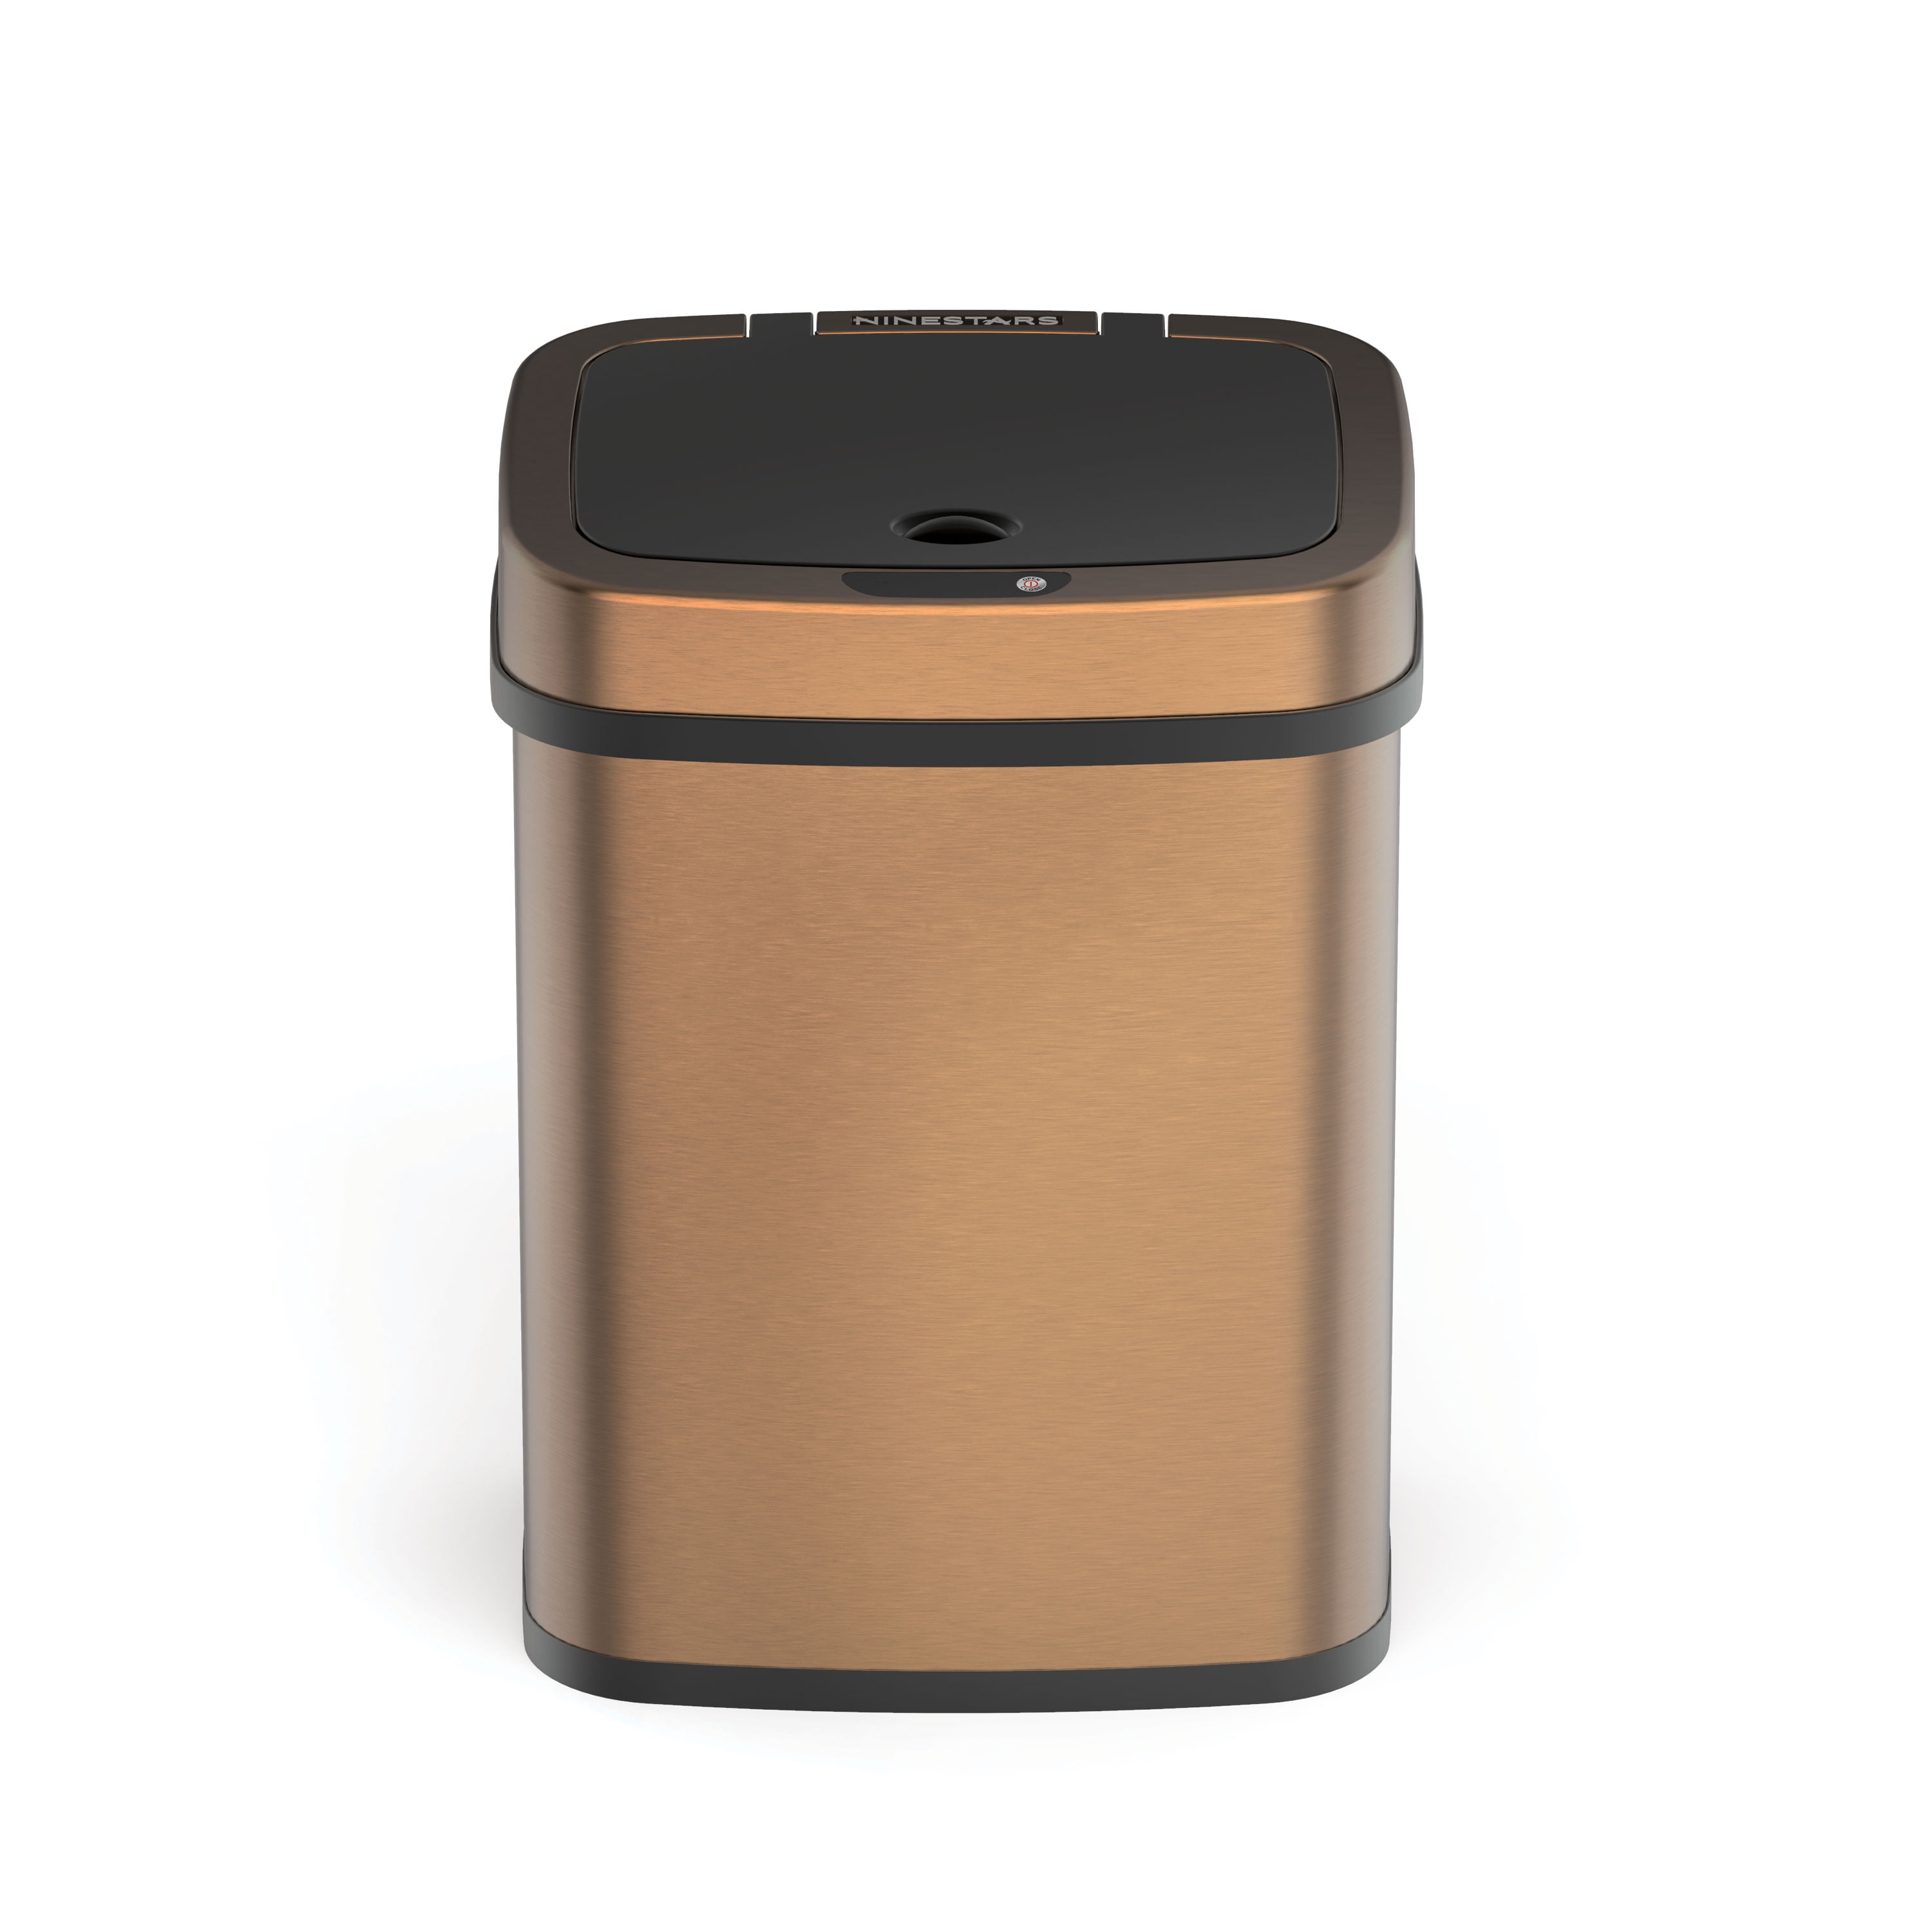 Gallon Trash Can, Touchless Bathroom Trash Can, Gold Stainless